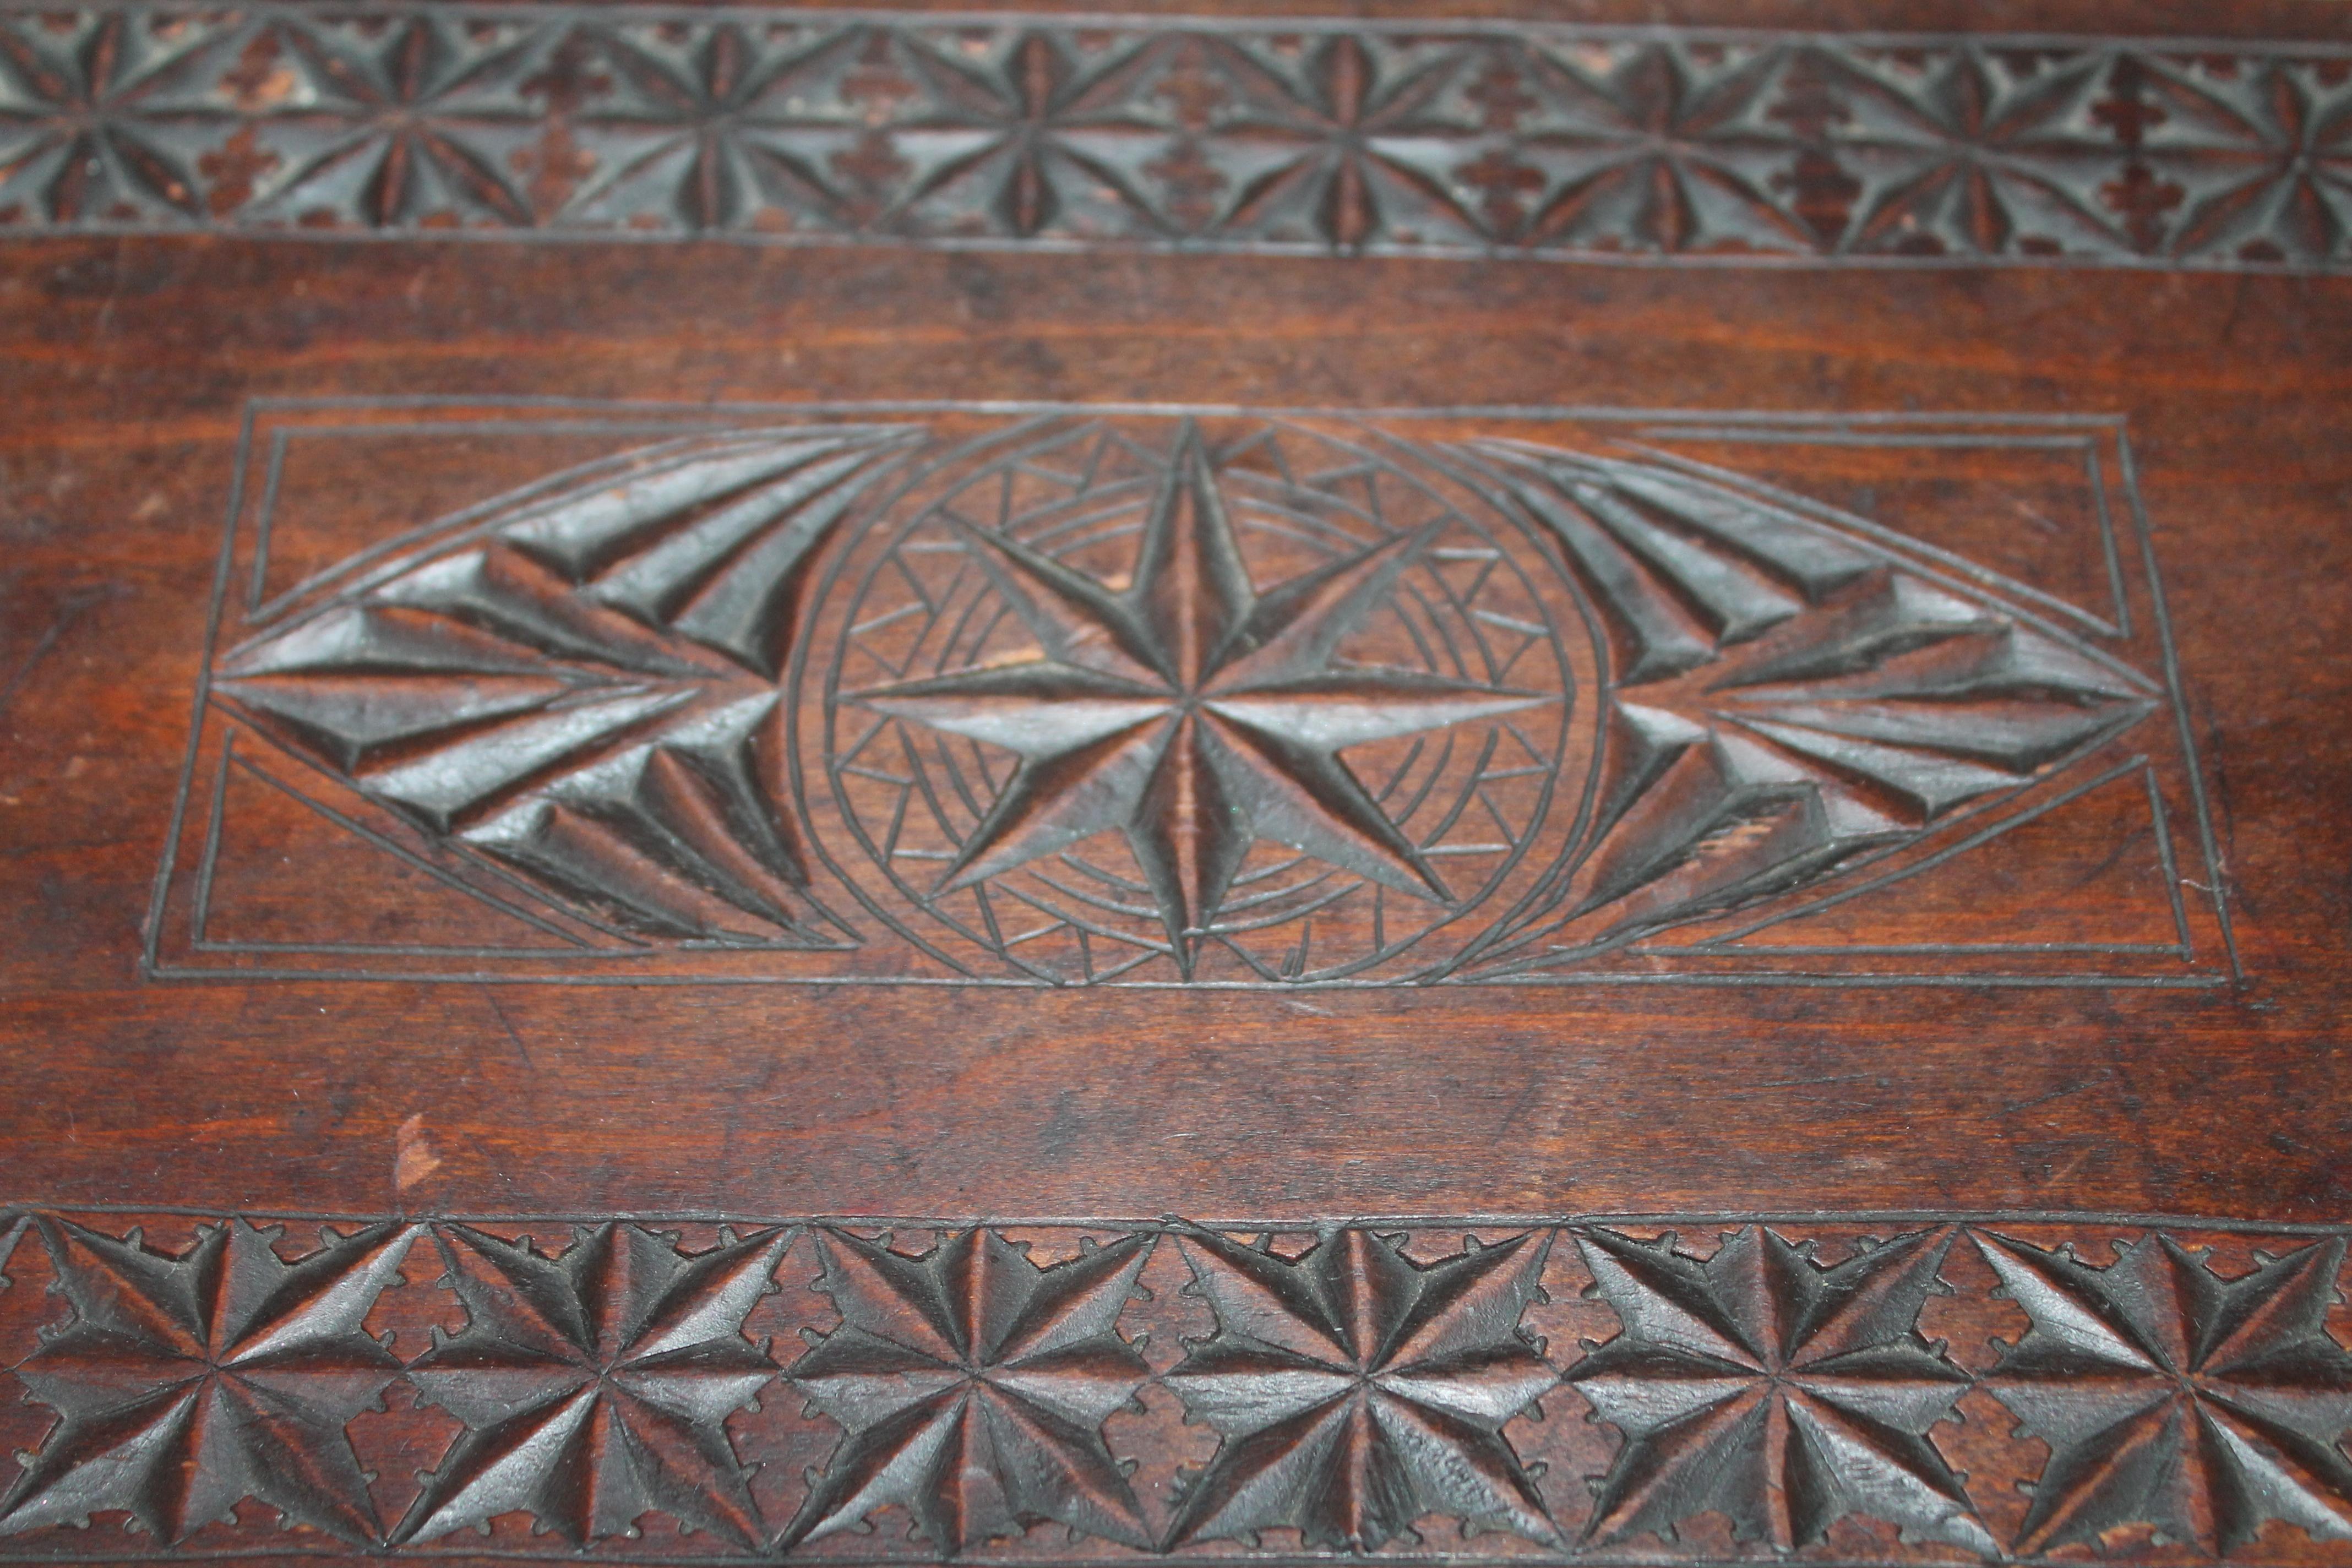 19th century hand carved nautical foot stool with cutout hearts on the sides. Detailed carving through out.